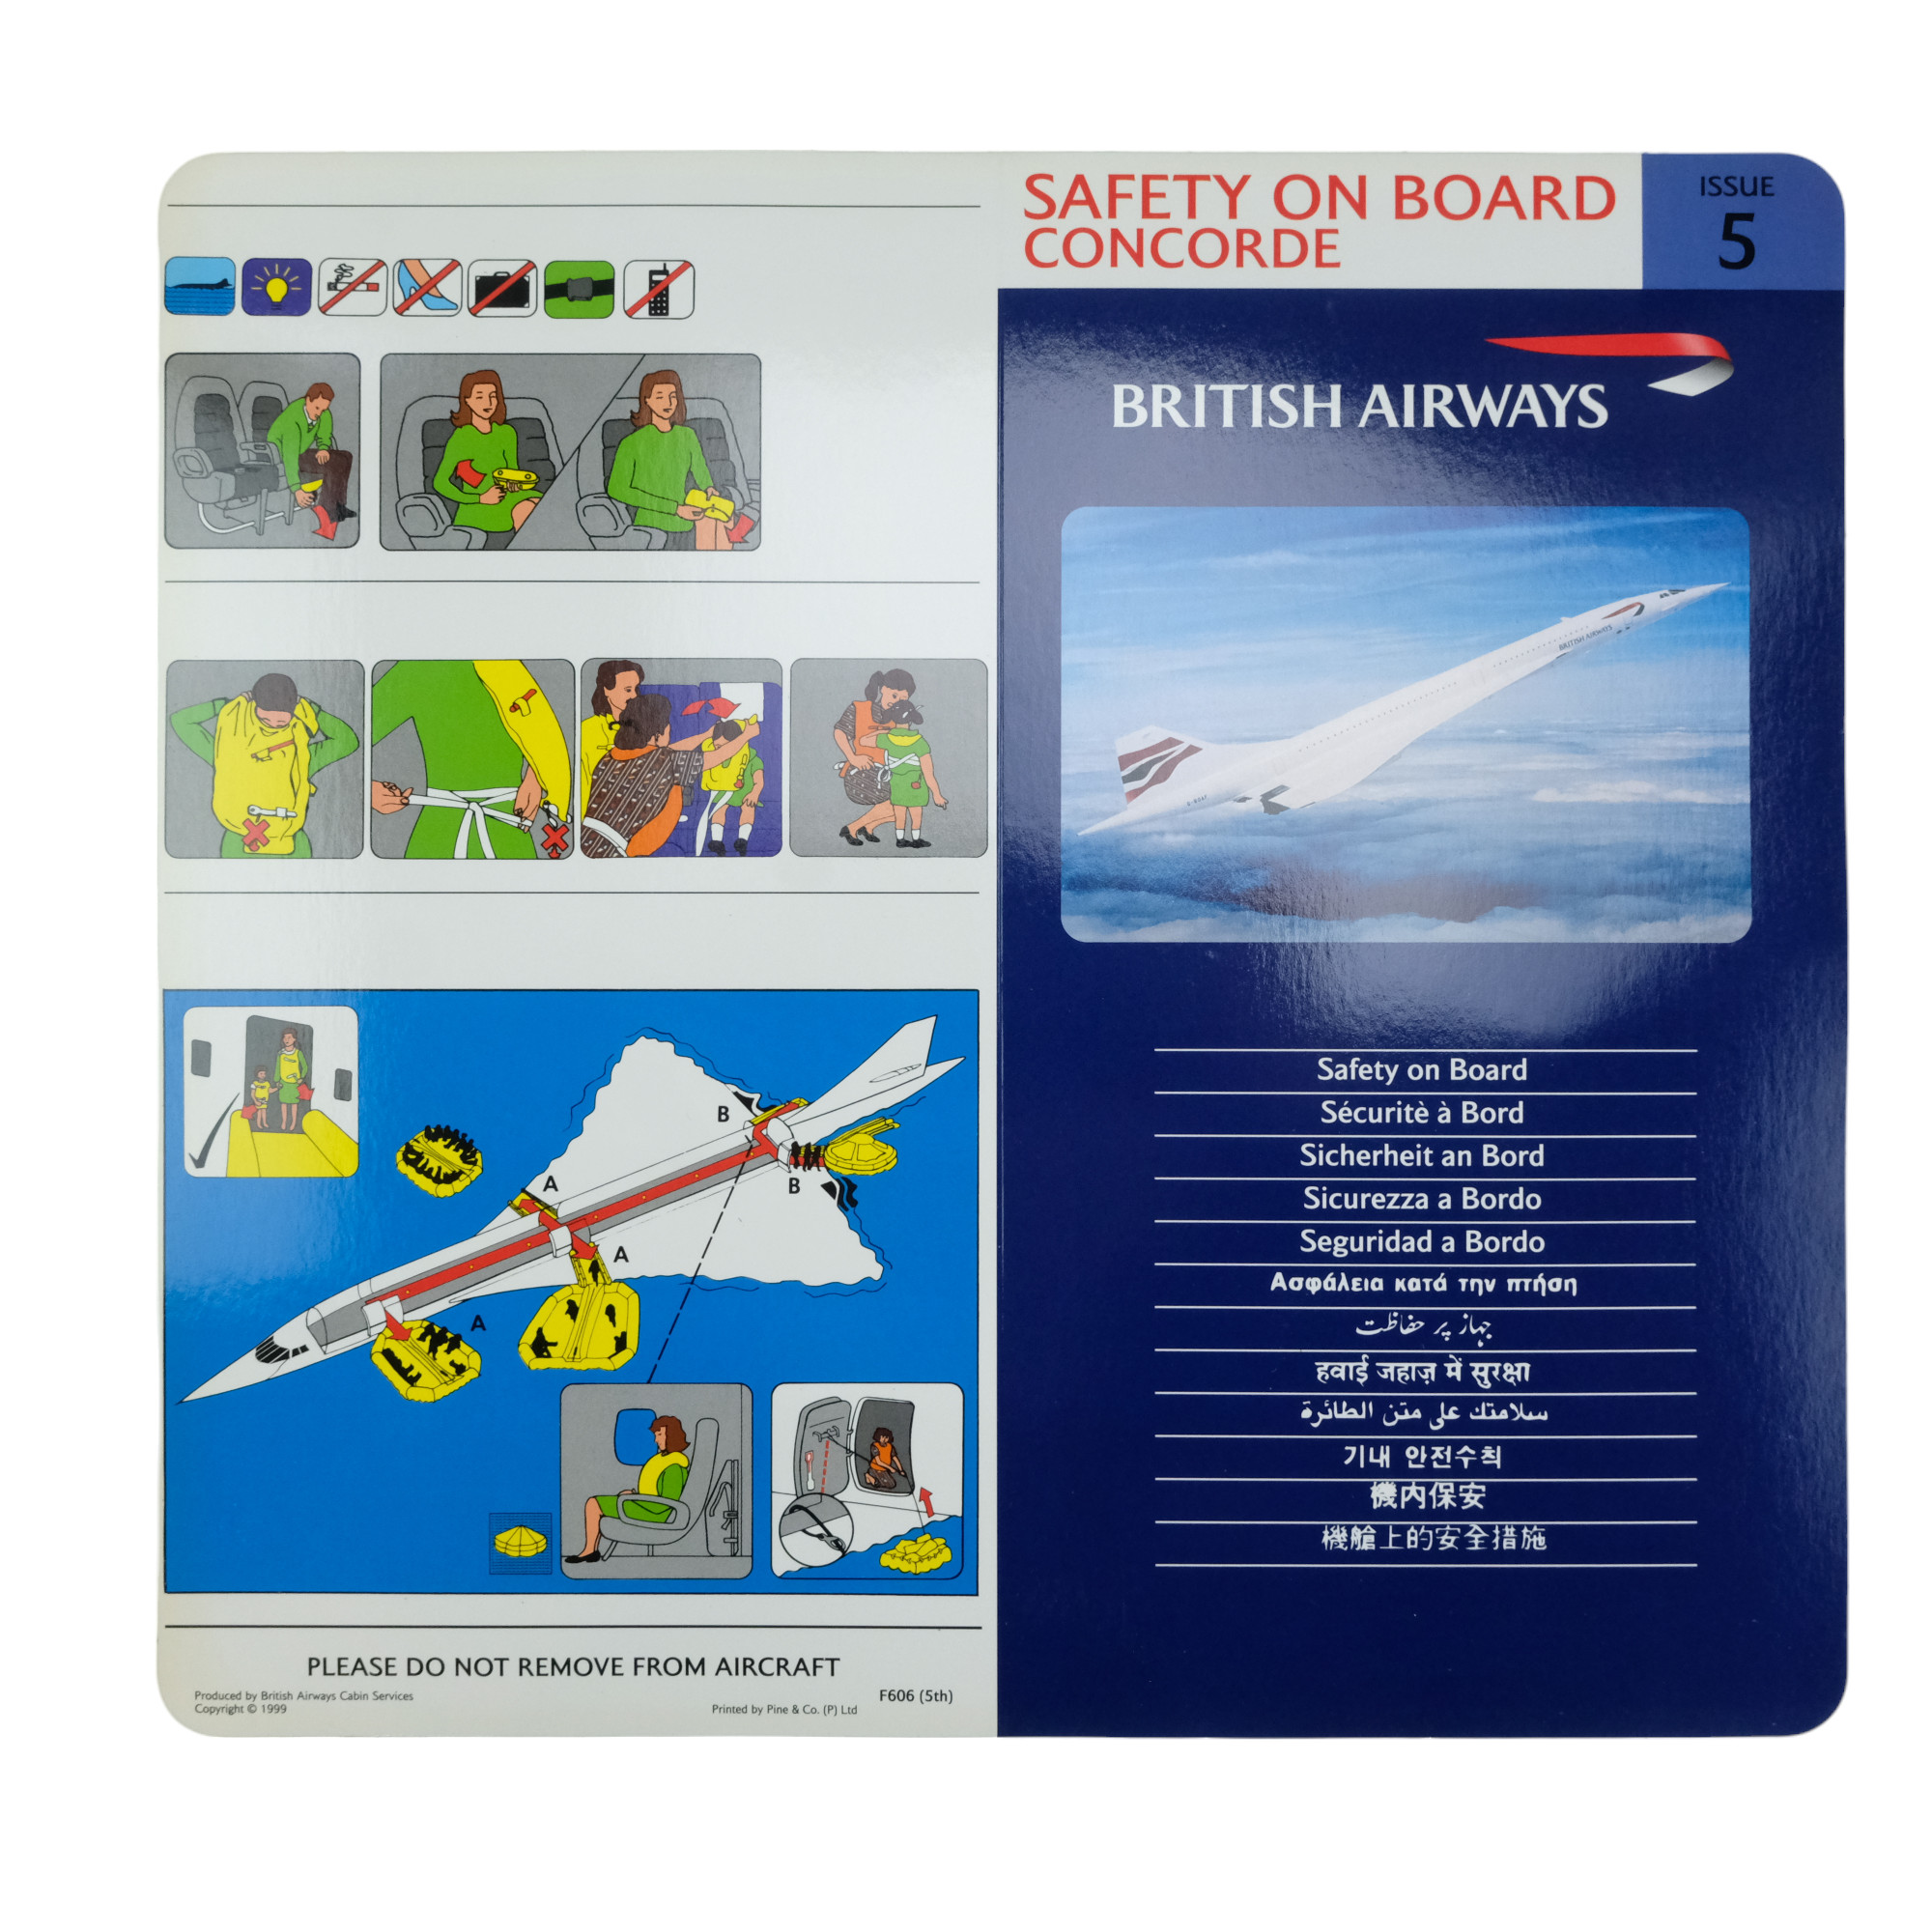 Five British Airways Concorde "Safety on Board" issue 5 safety cards - Image 2 of 2